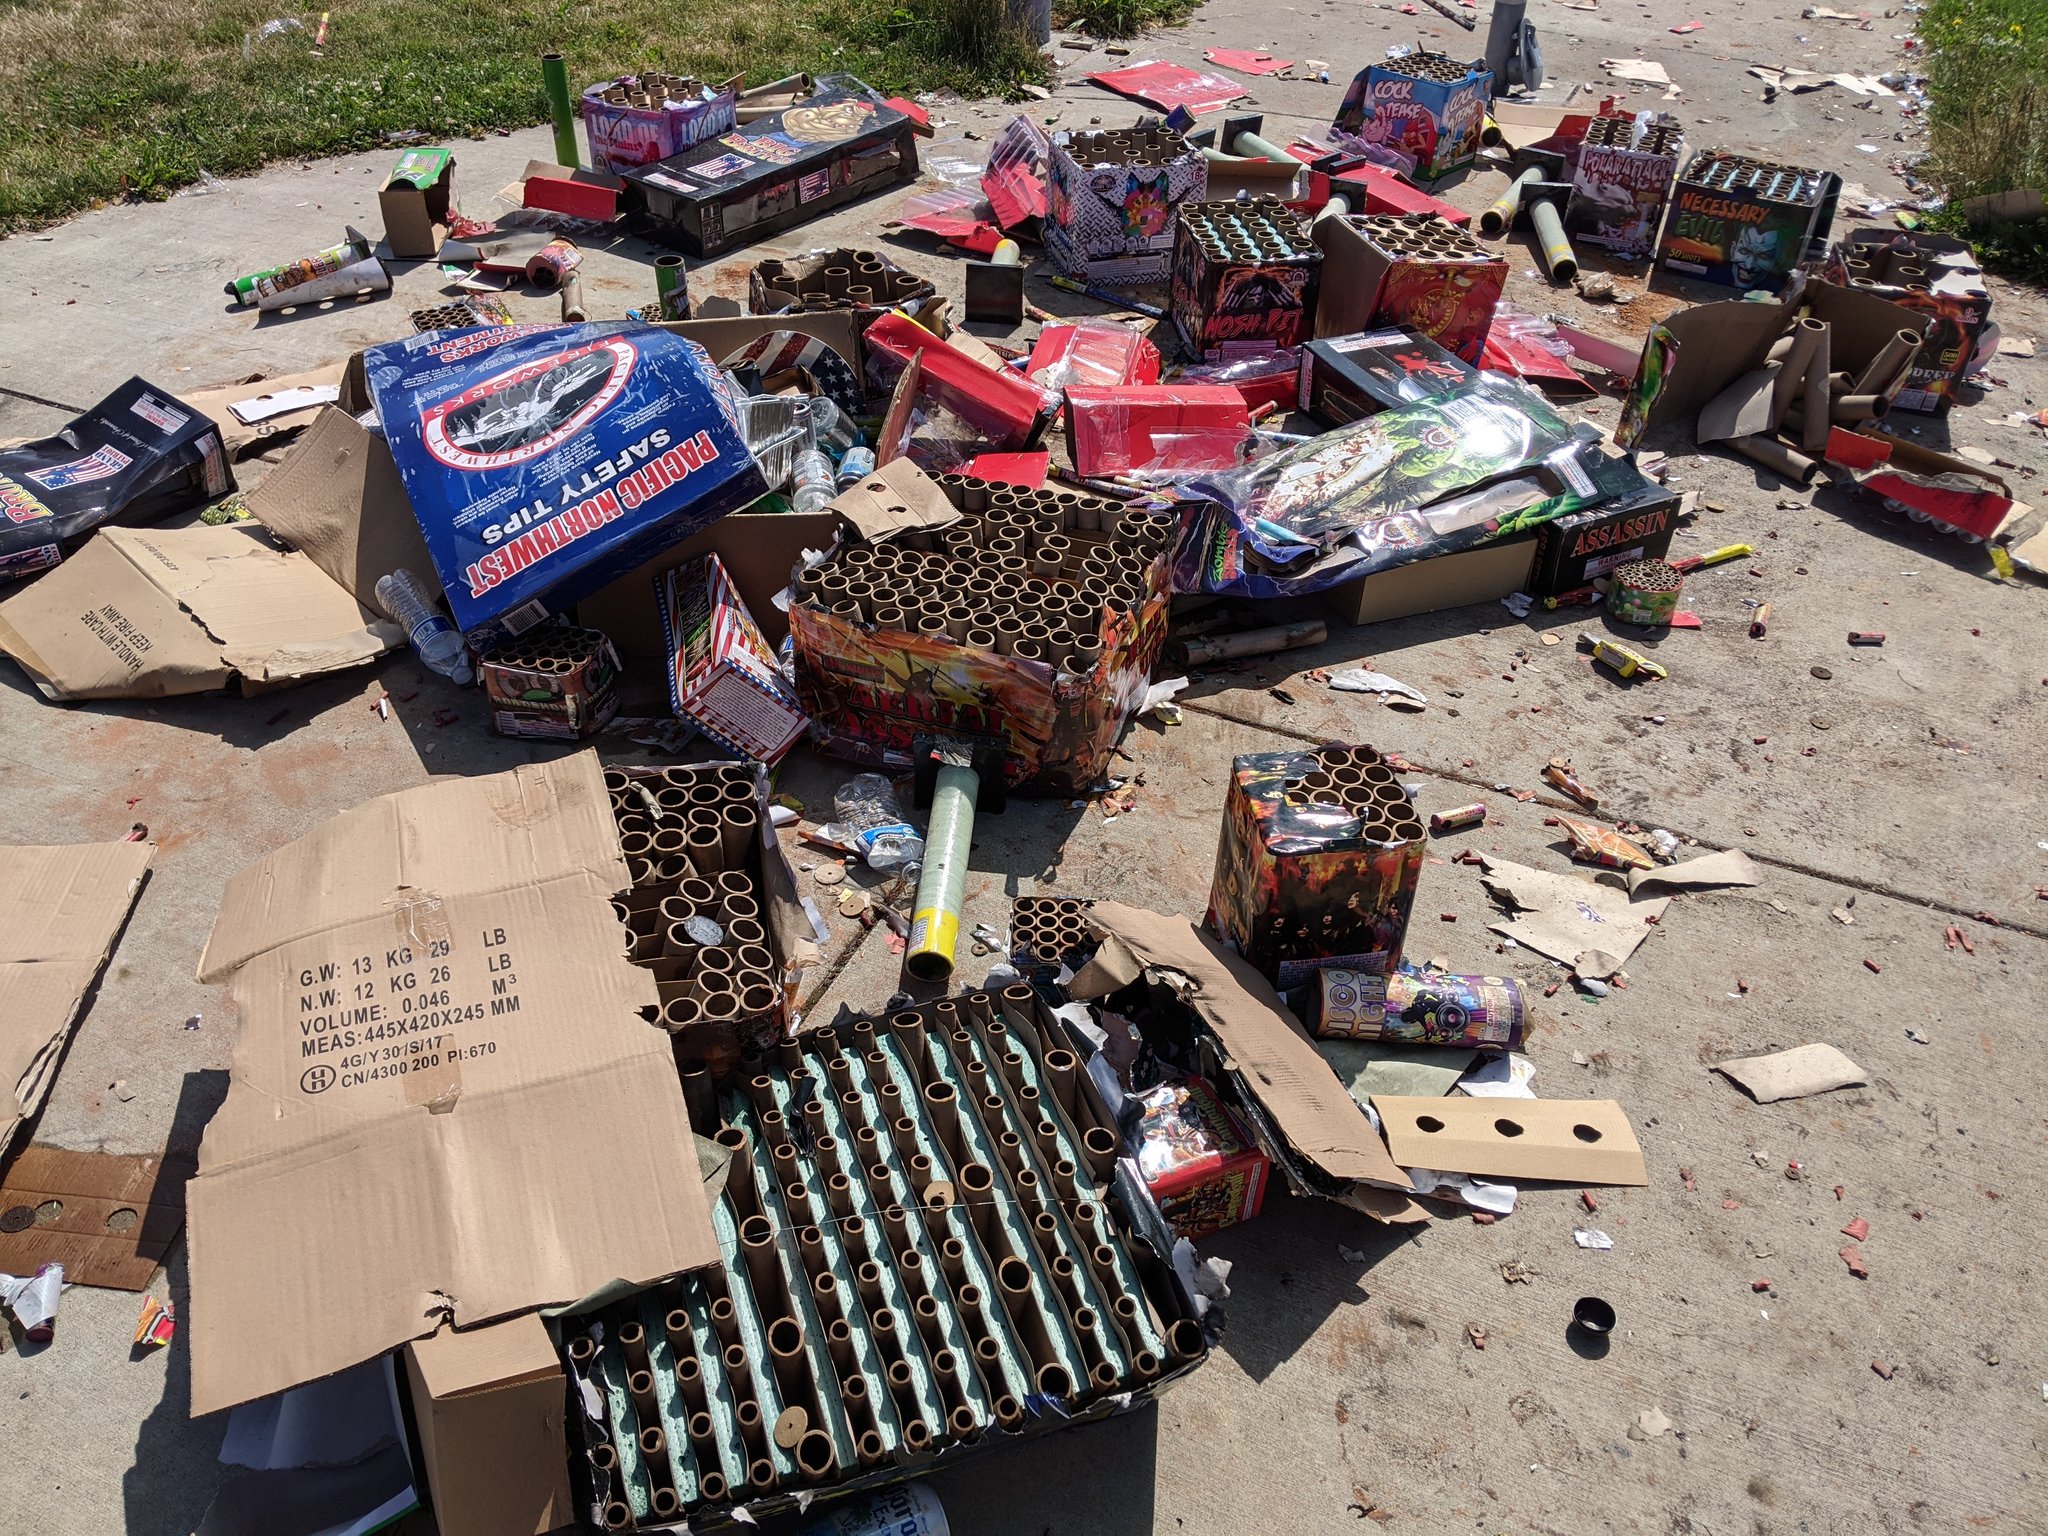 They set off fireworks during the summer months till 3 am, and don't clean up the trash from them. -imout94